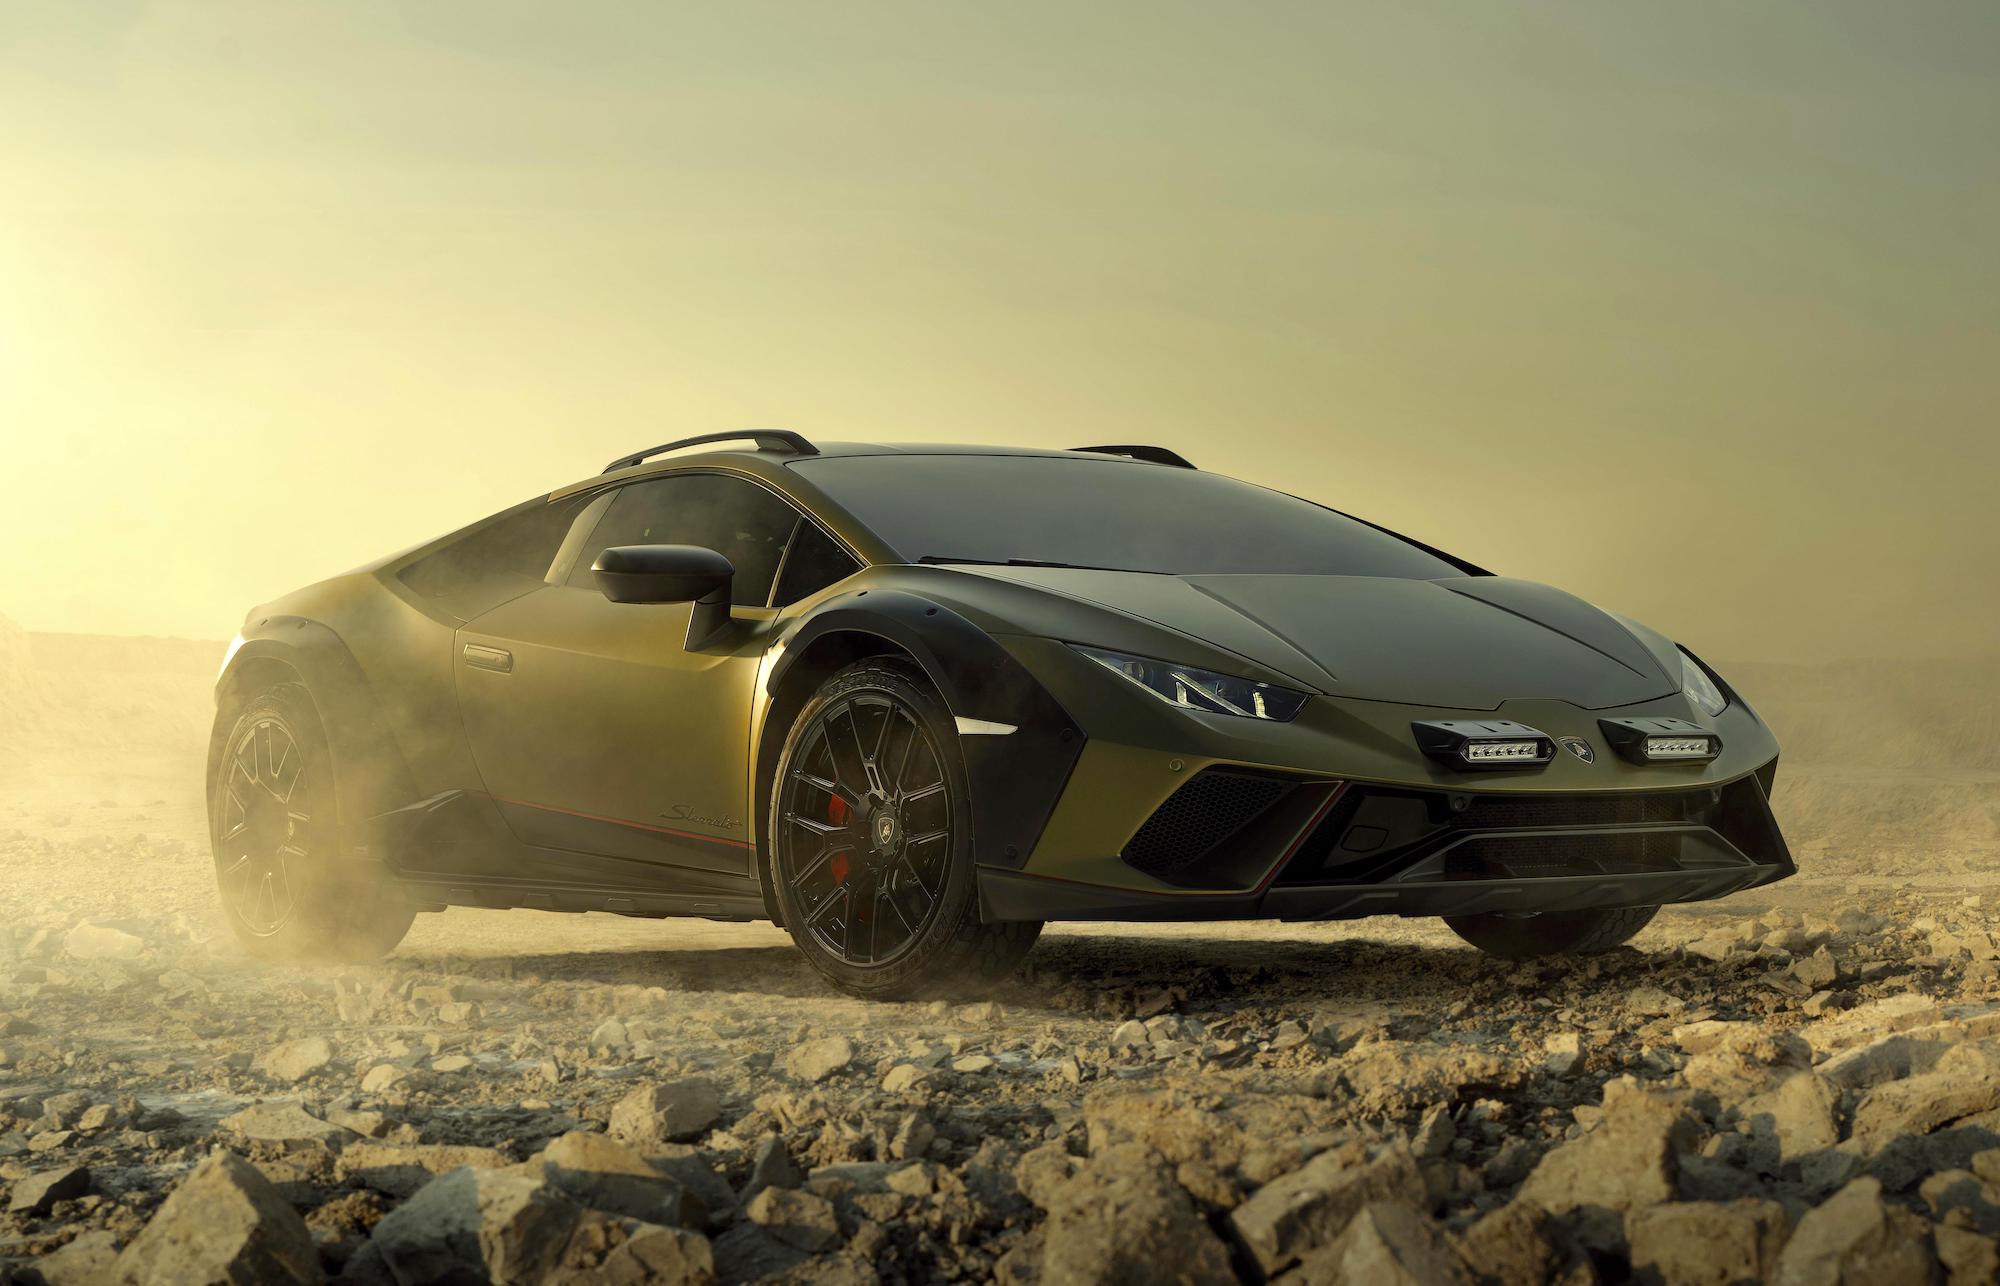 From Miatas to Lamborghinis, these sports cars are meant for dirt, not asphalt